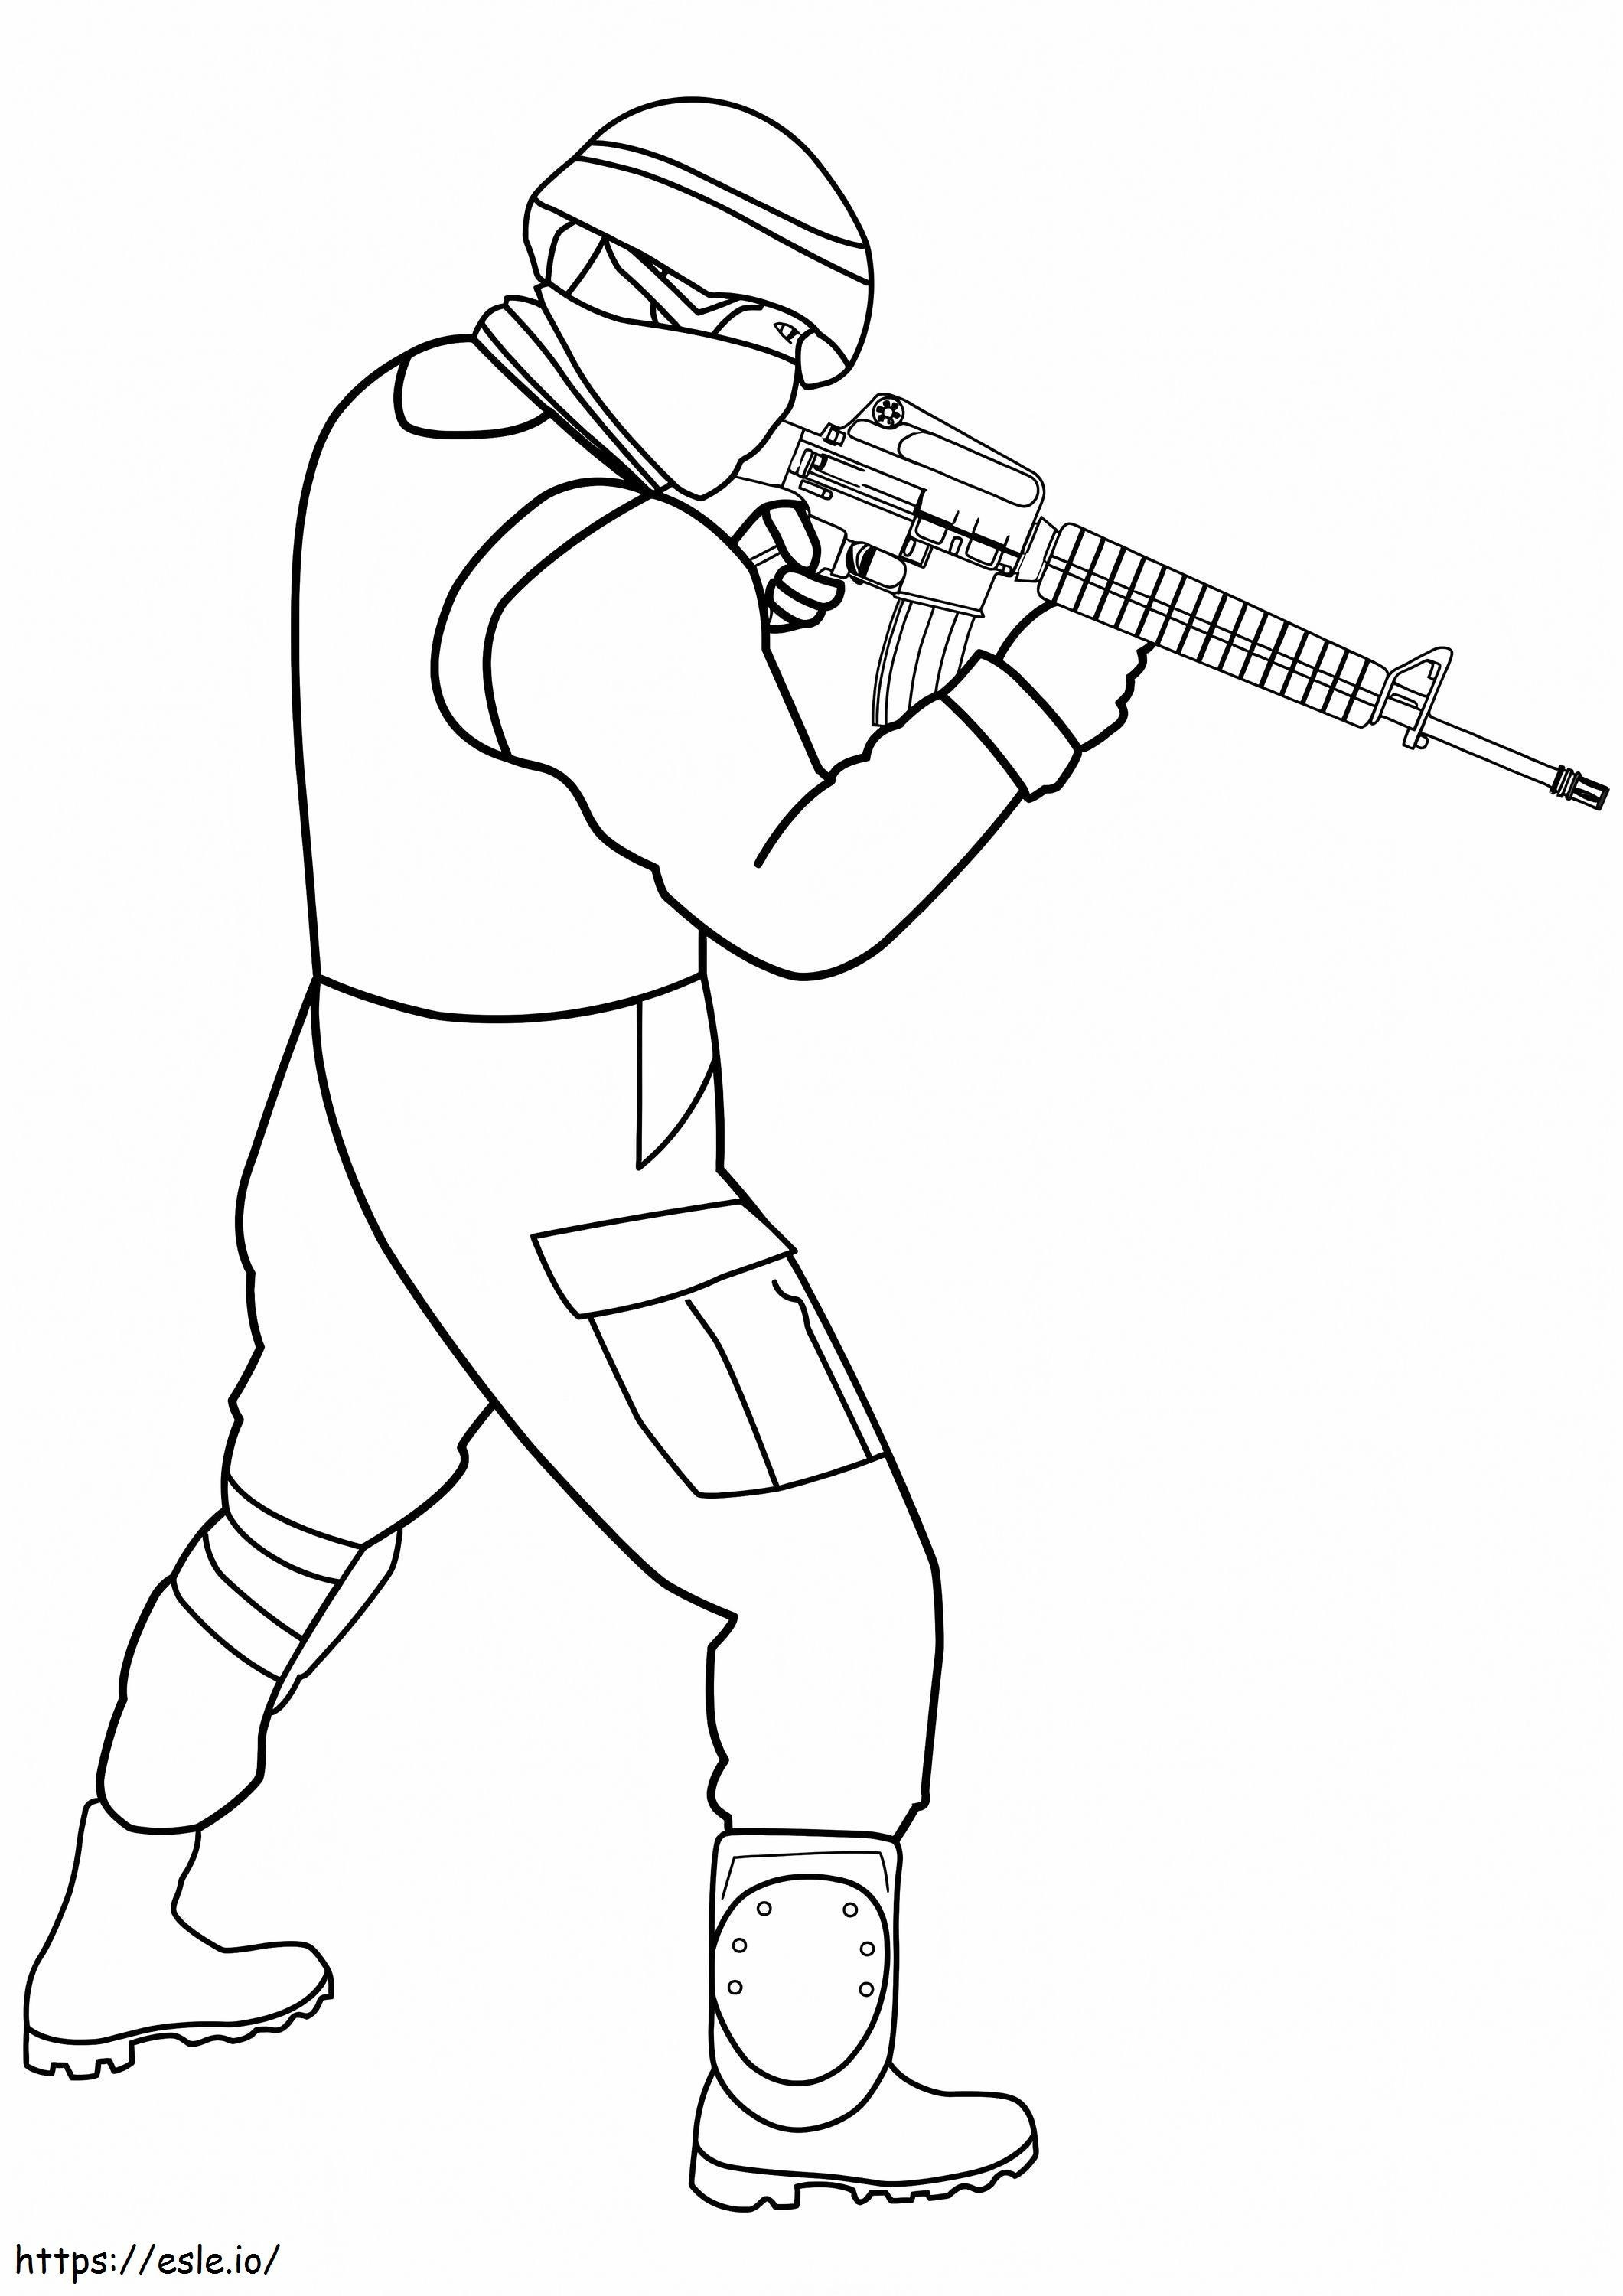 1545387005 Special Forces Soldier coloring page